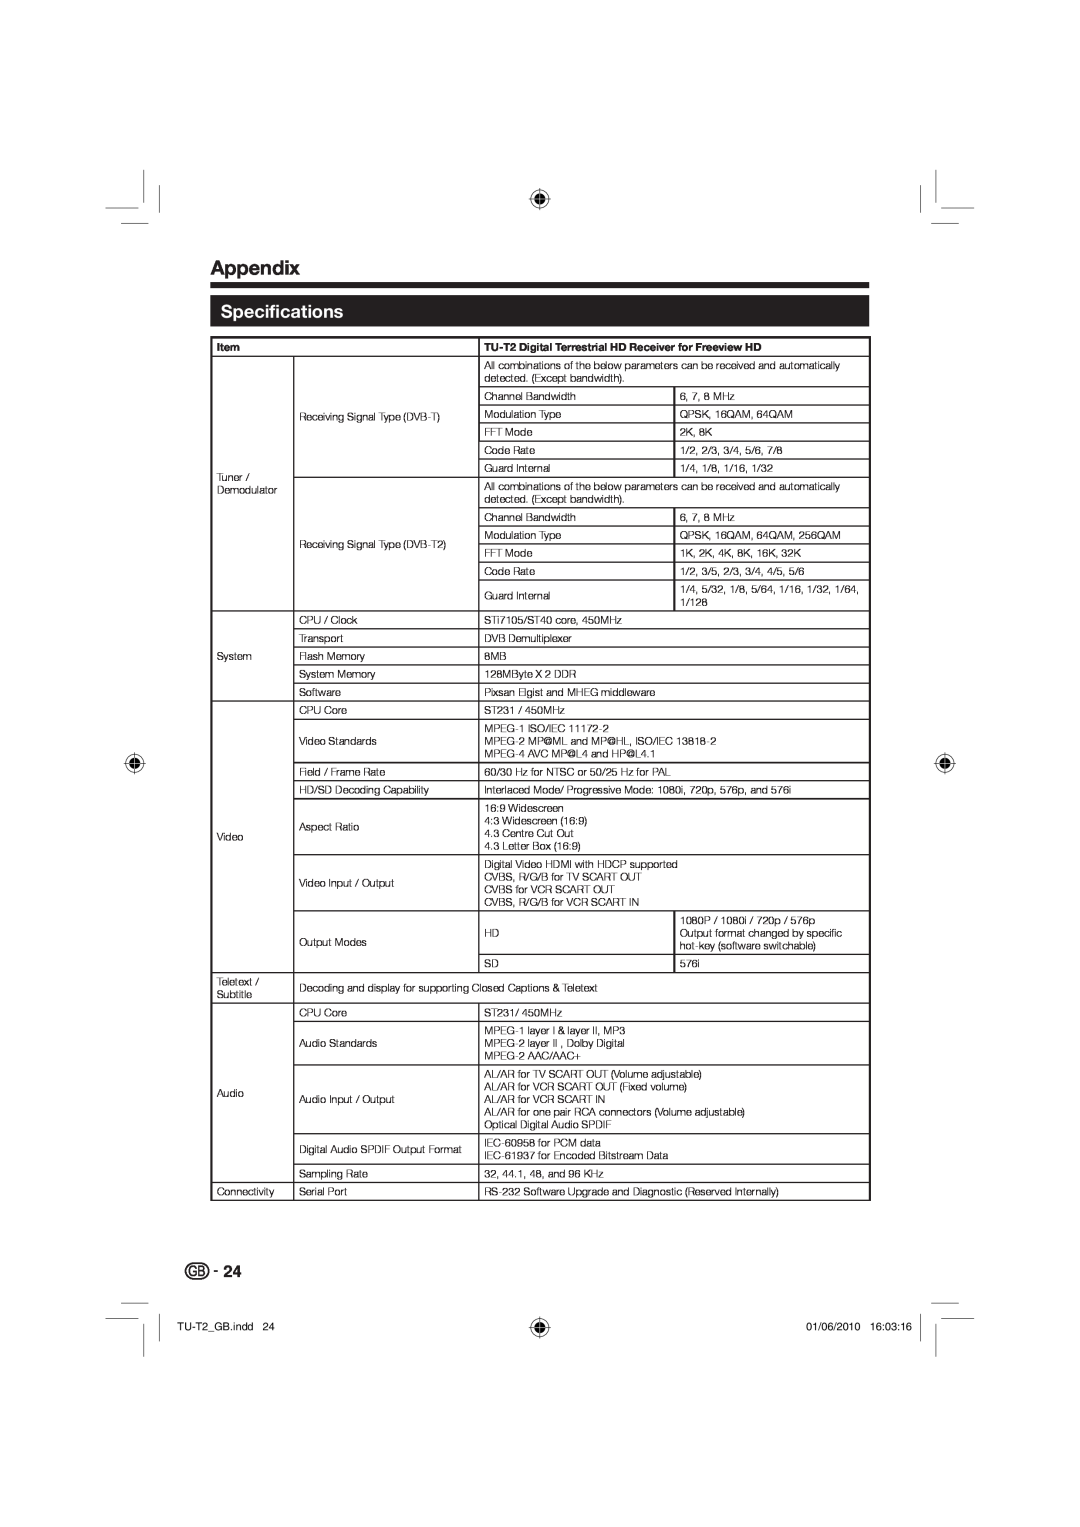 Sharp operation manual Appendix, Specifications, TU-T2GB.indd, 01/06/2010 